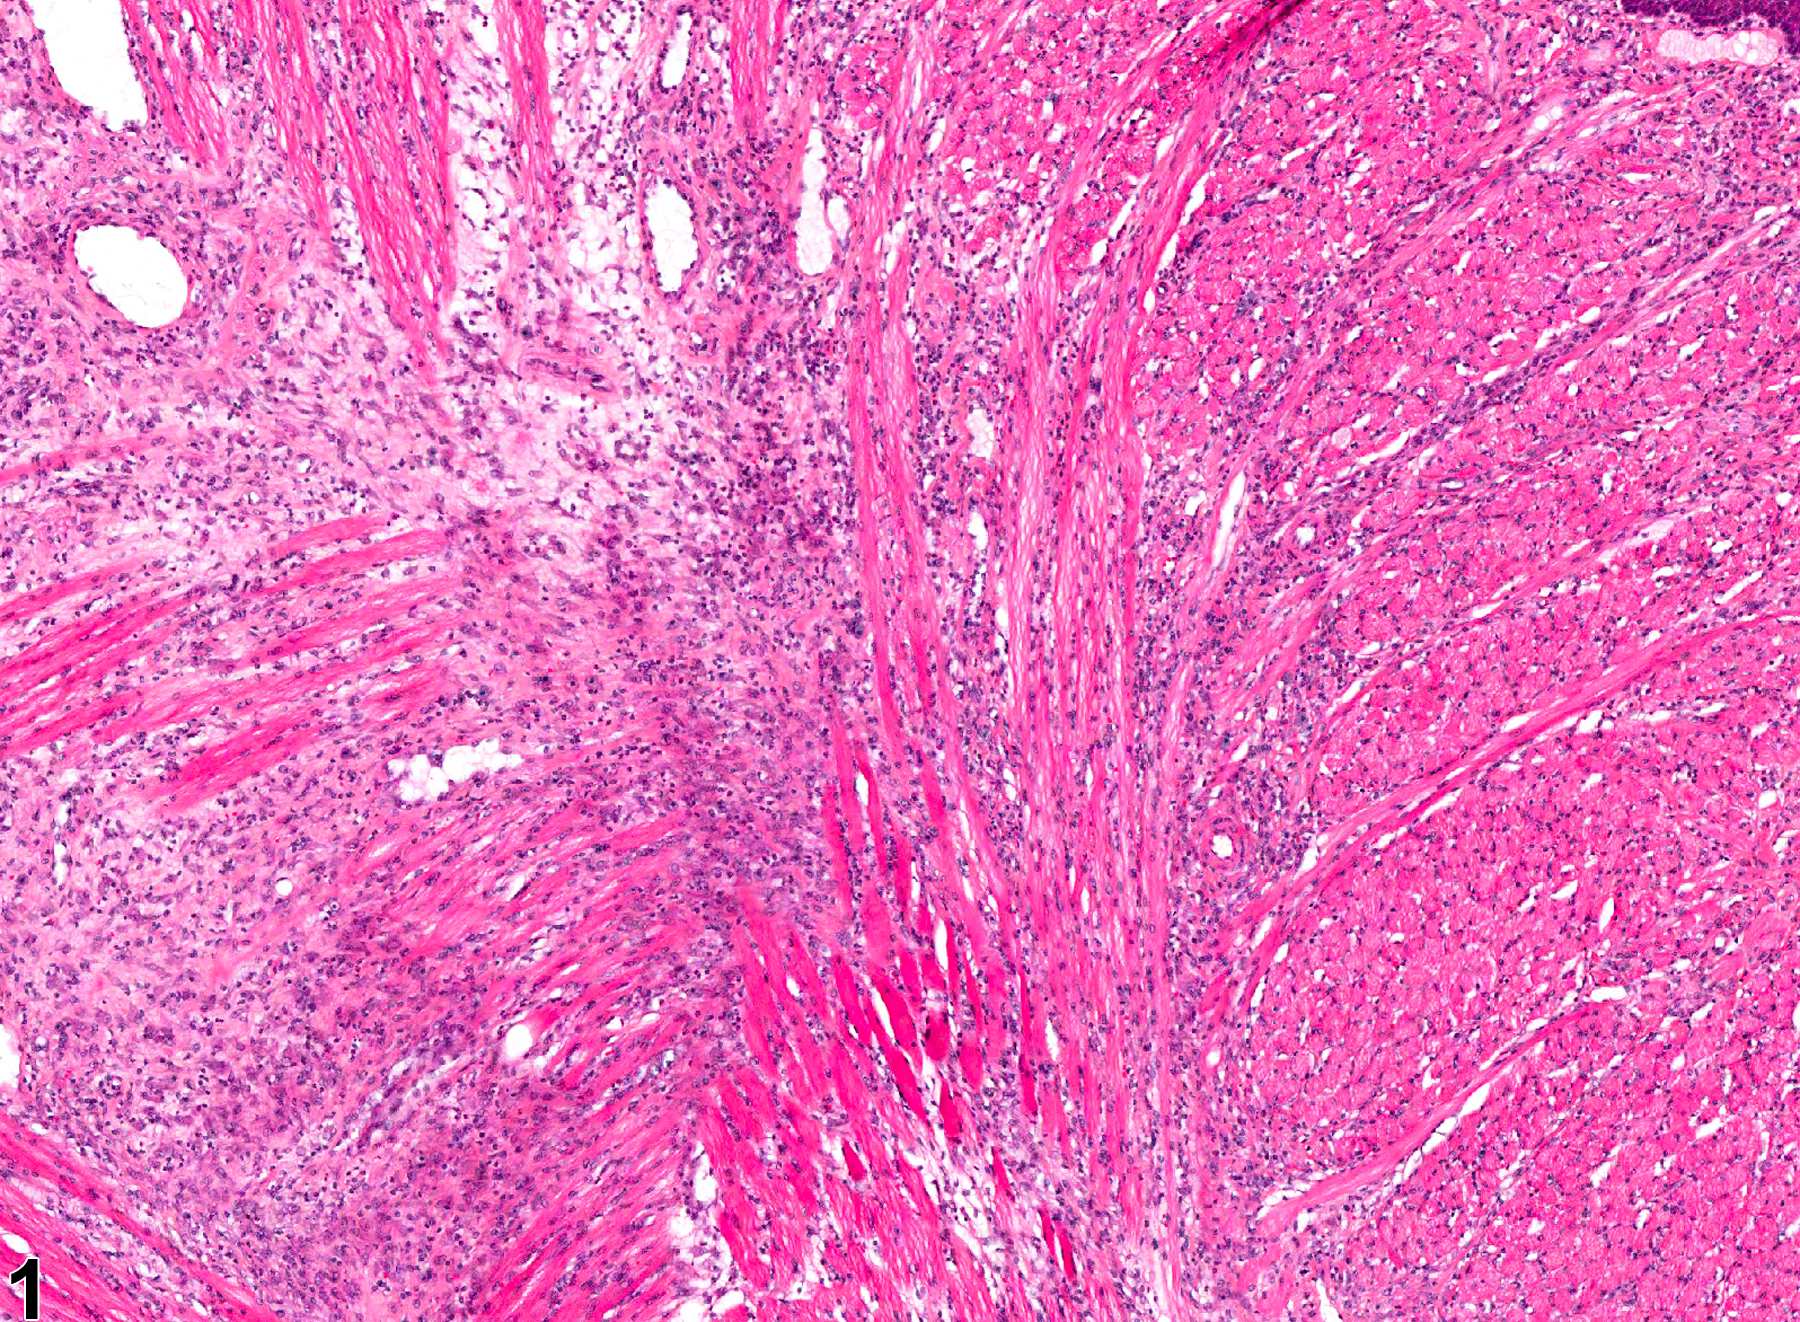 Image of inflammation in the tongue from a female F344/N rat in a chronic study